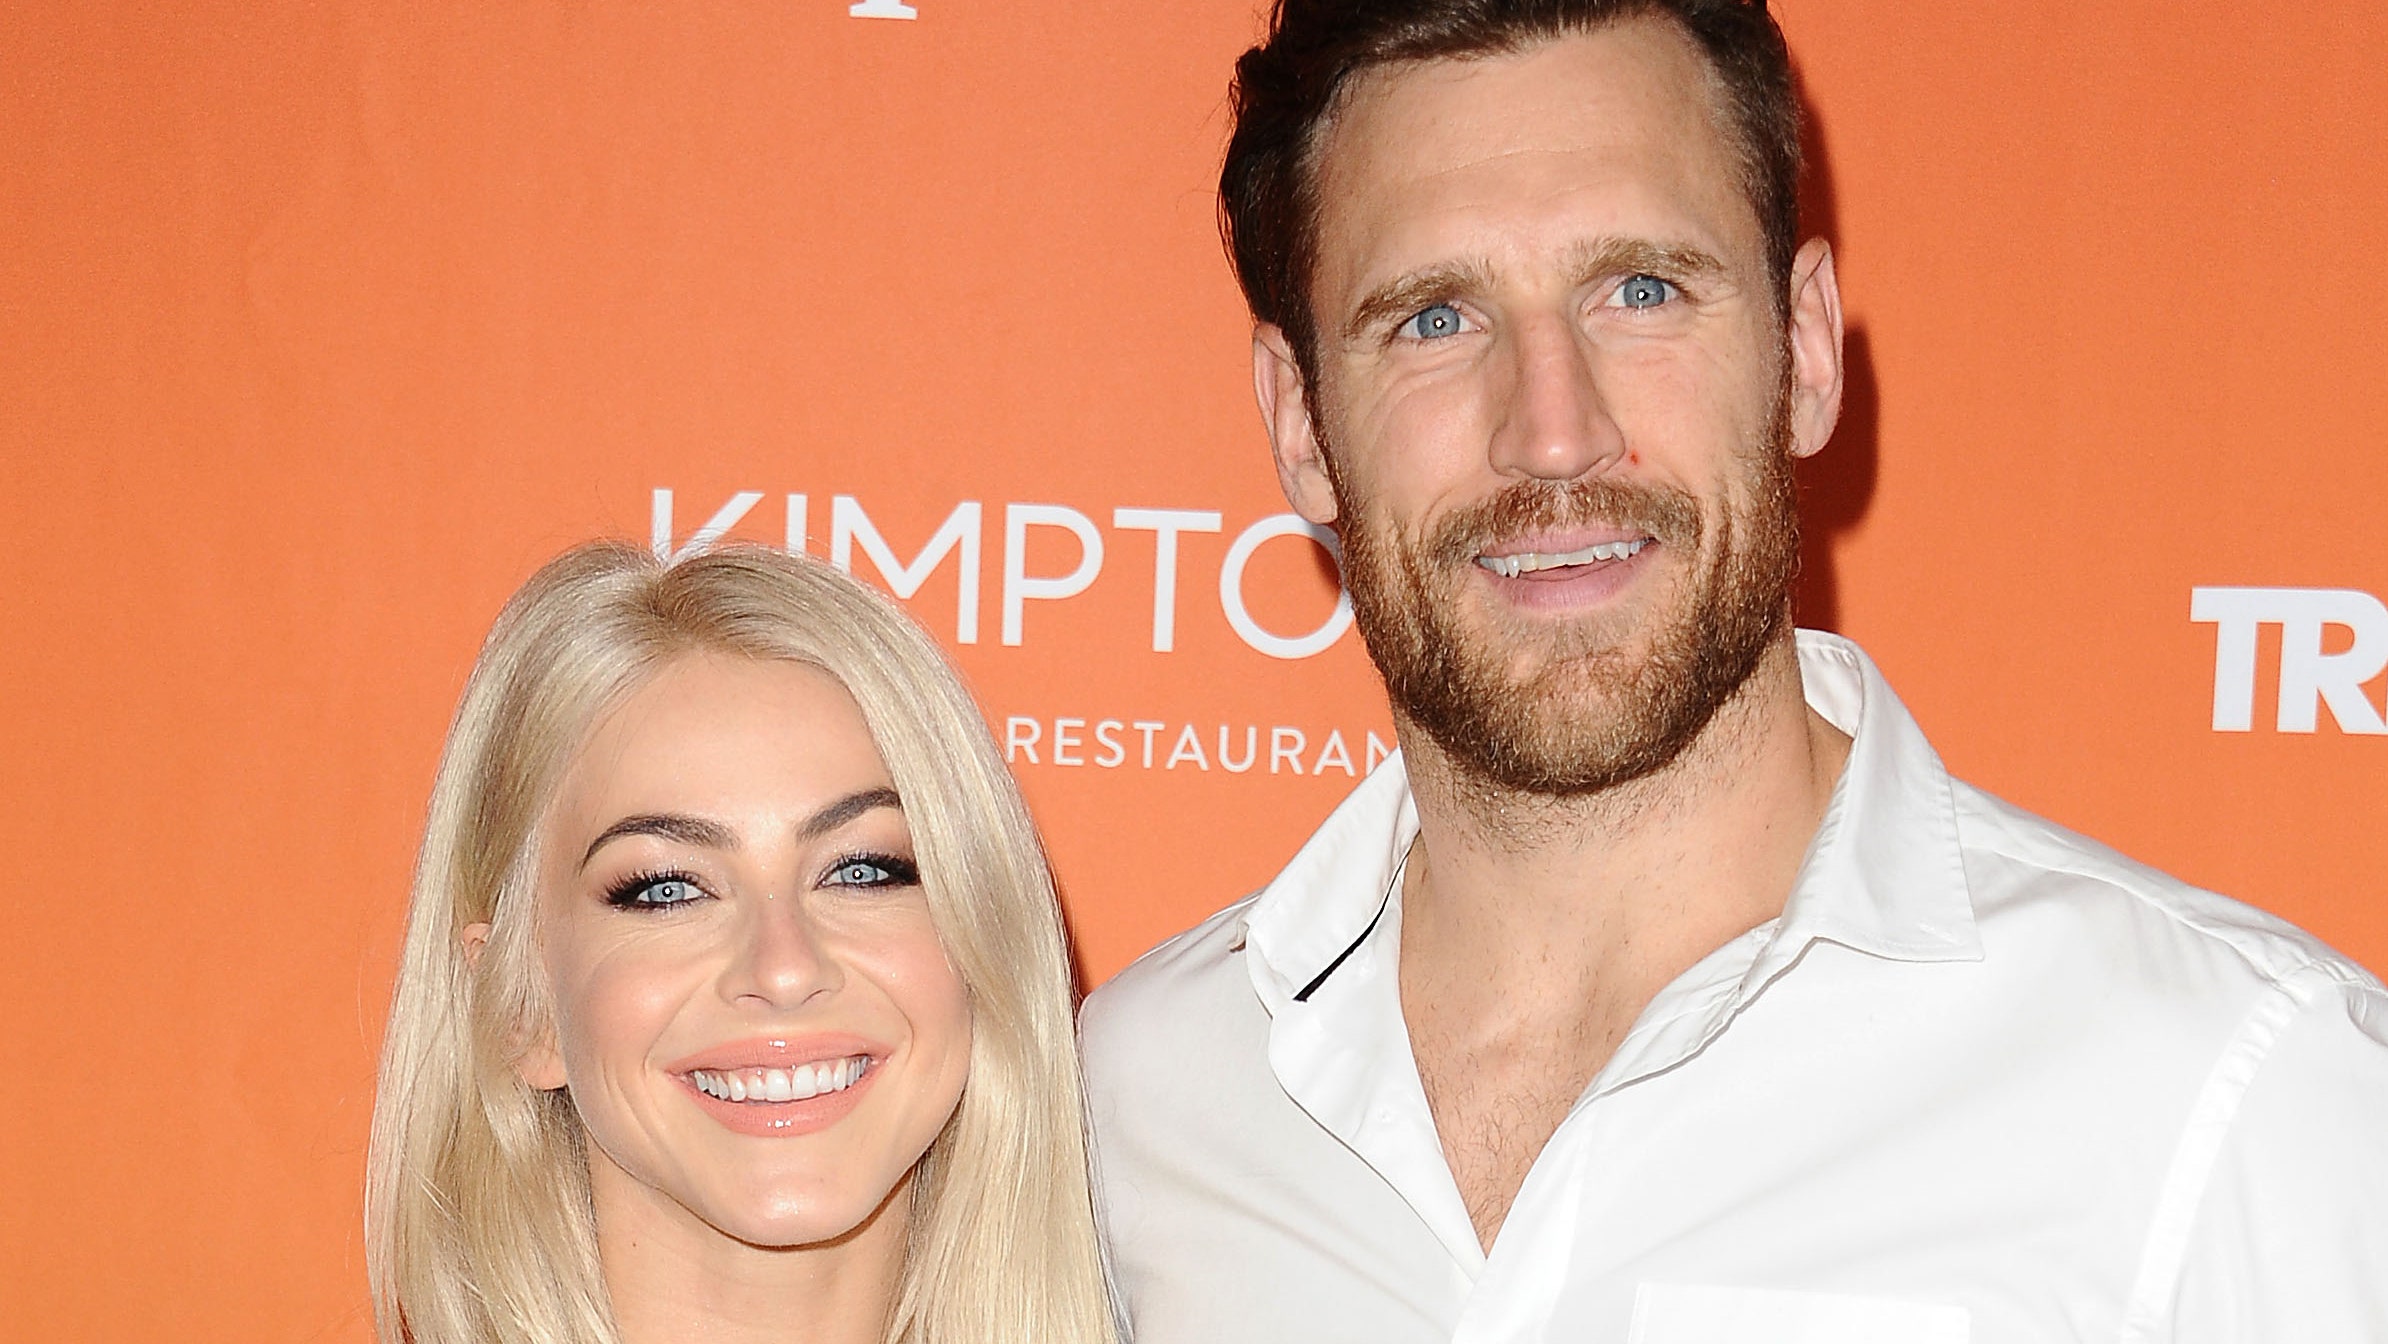 Julianne Hough and Brooks Laich Officially Divorced